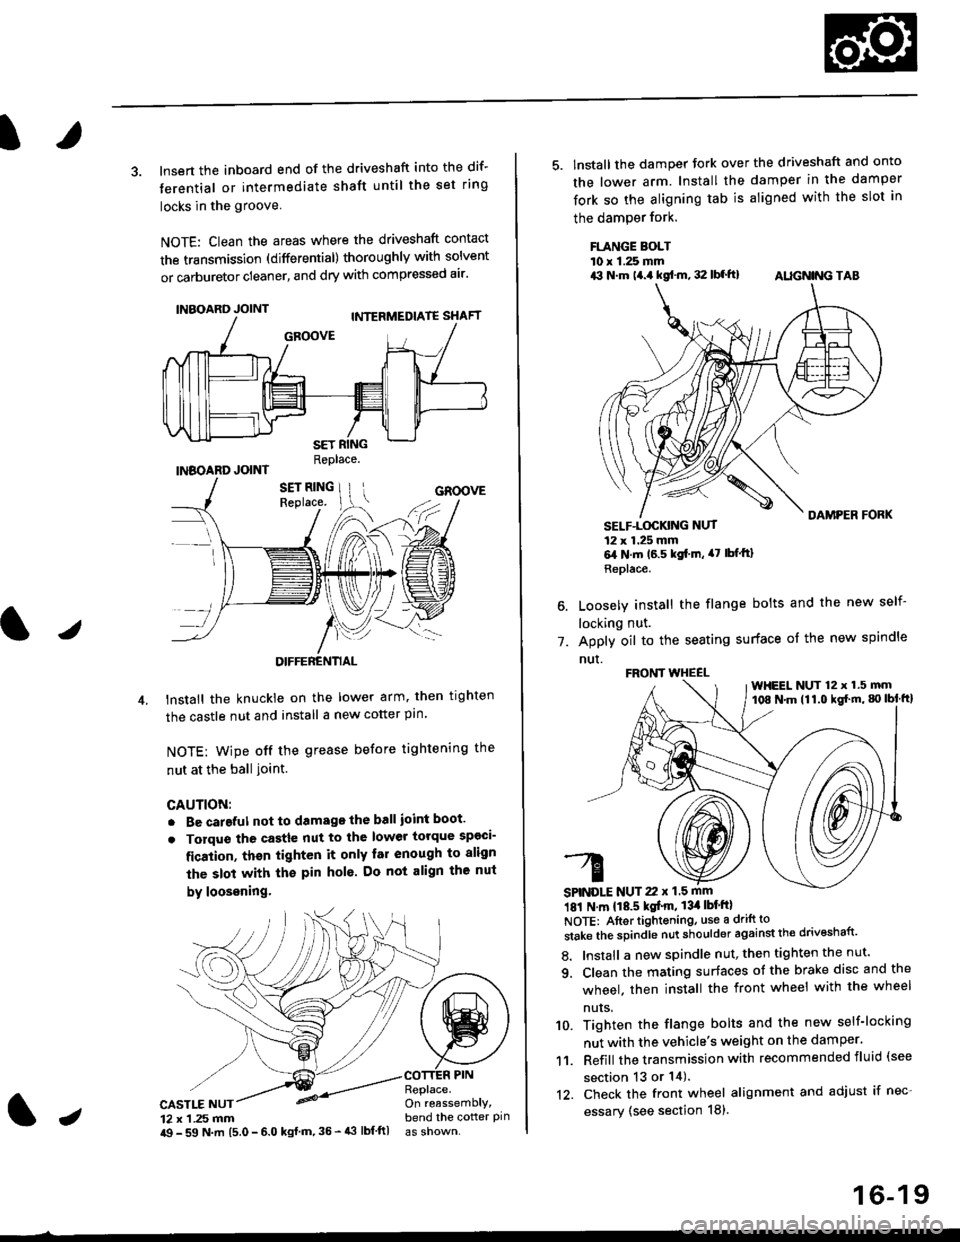 HONDA CIVIC 1997 6.G Owners Manual 3. lnsert the inboard end of the driveshaft into the dif-
terential or intermediate shaft until the set ring
locks in the groove
NOTE: Clean the areas where the driveshaft contact
the transmission (di